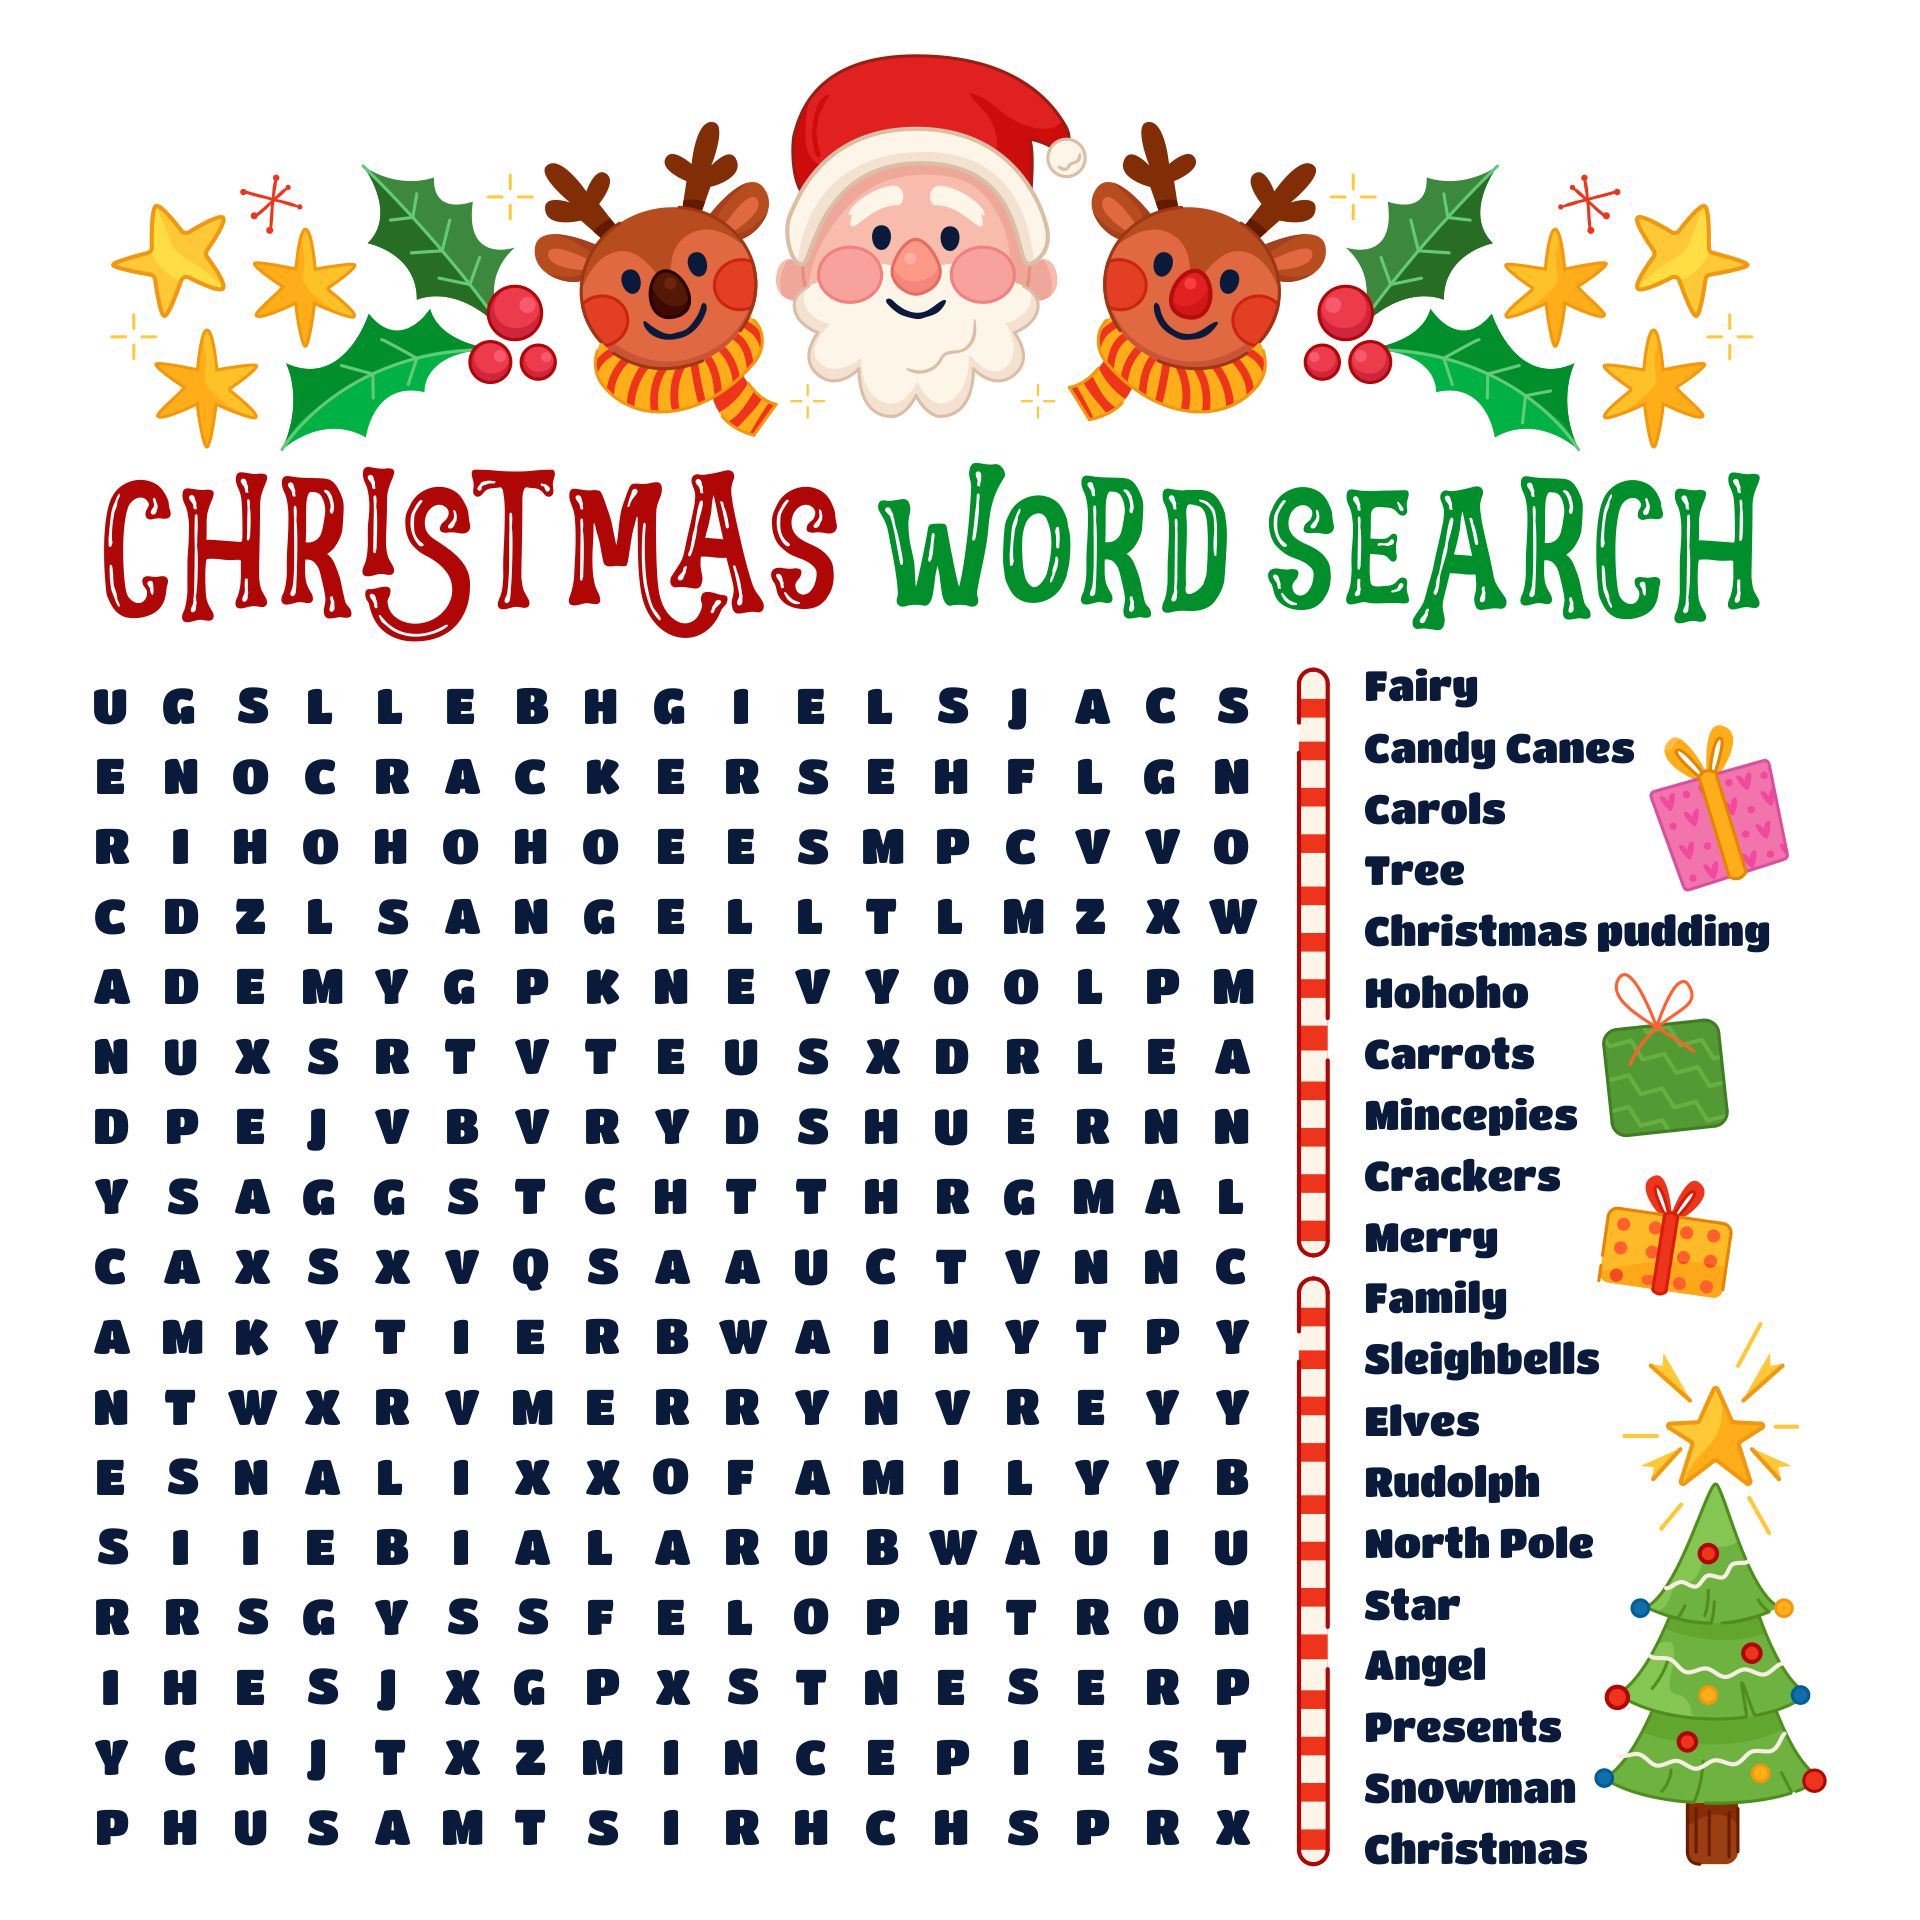 Kids Ready For Christmas Word Search Printables